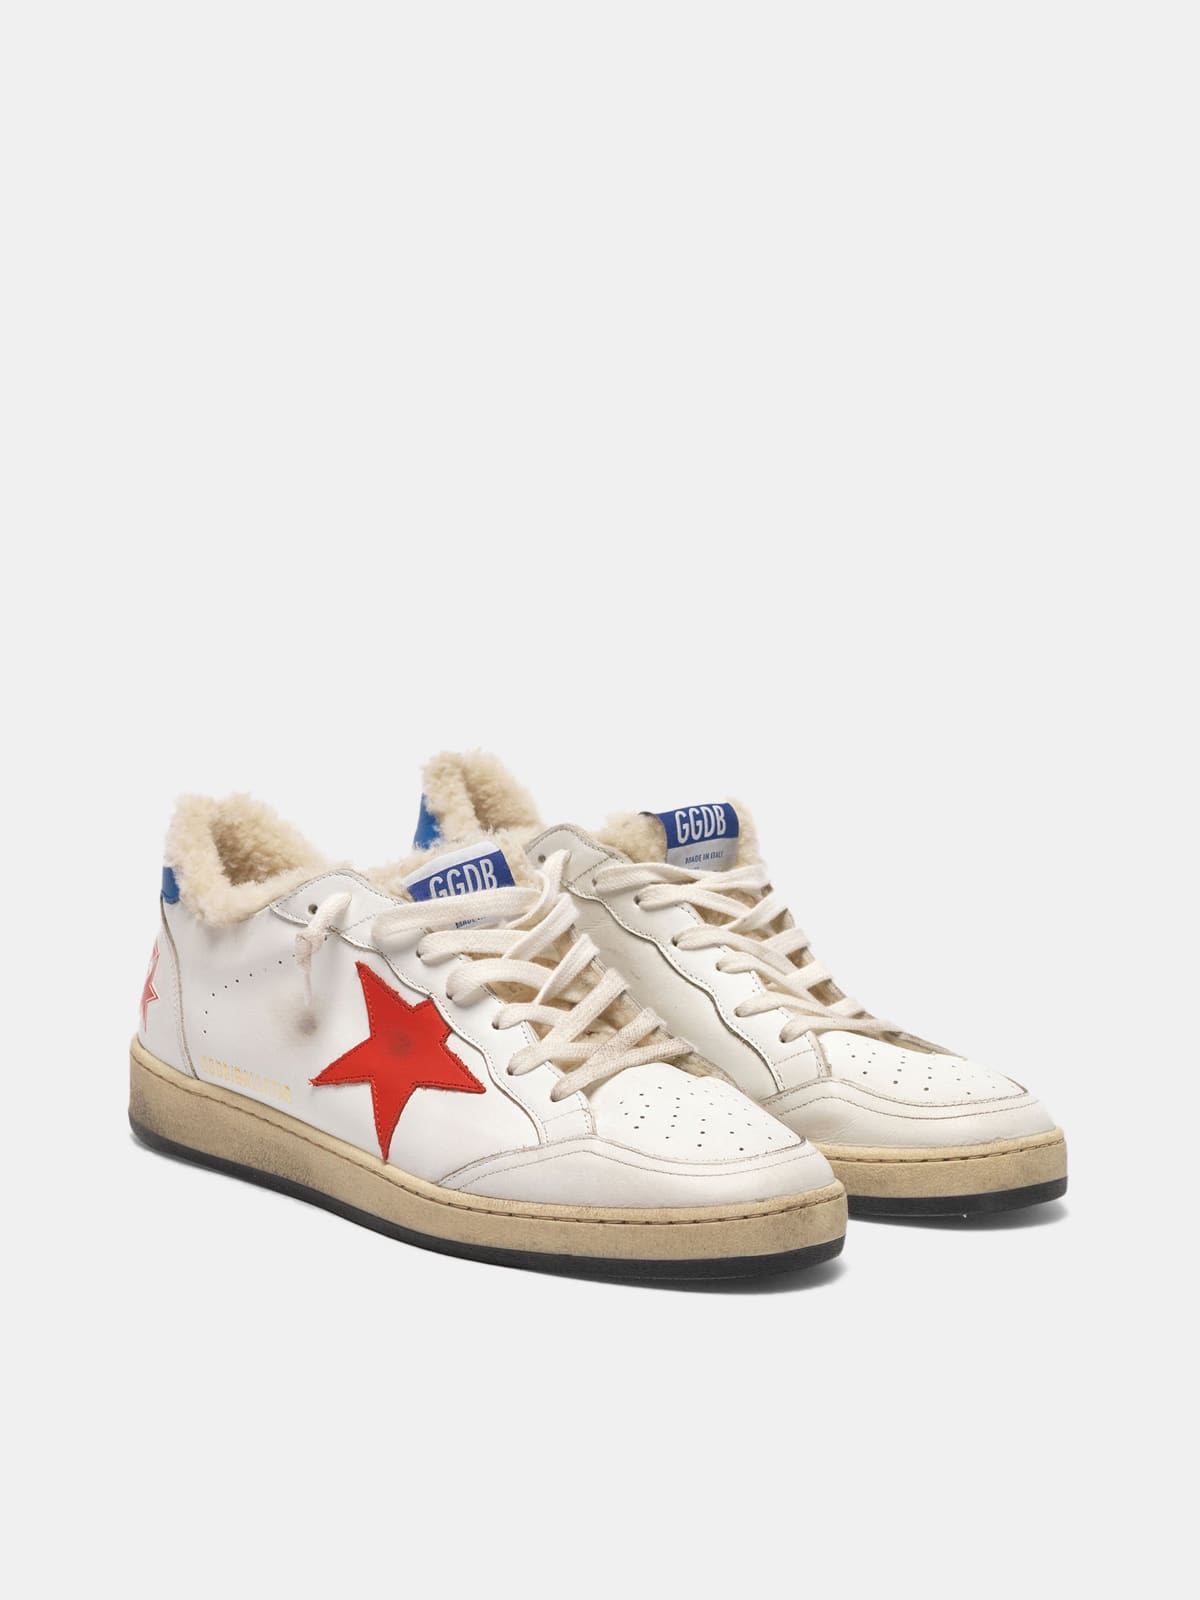 Ball Star sneakers in leather with shearling insert